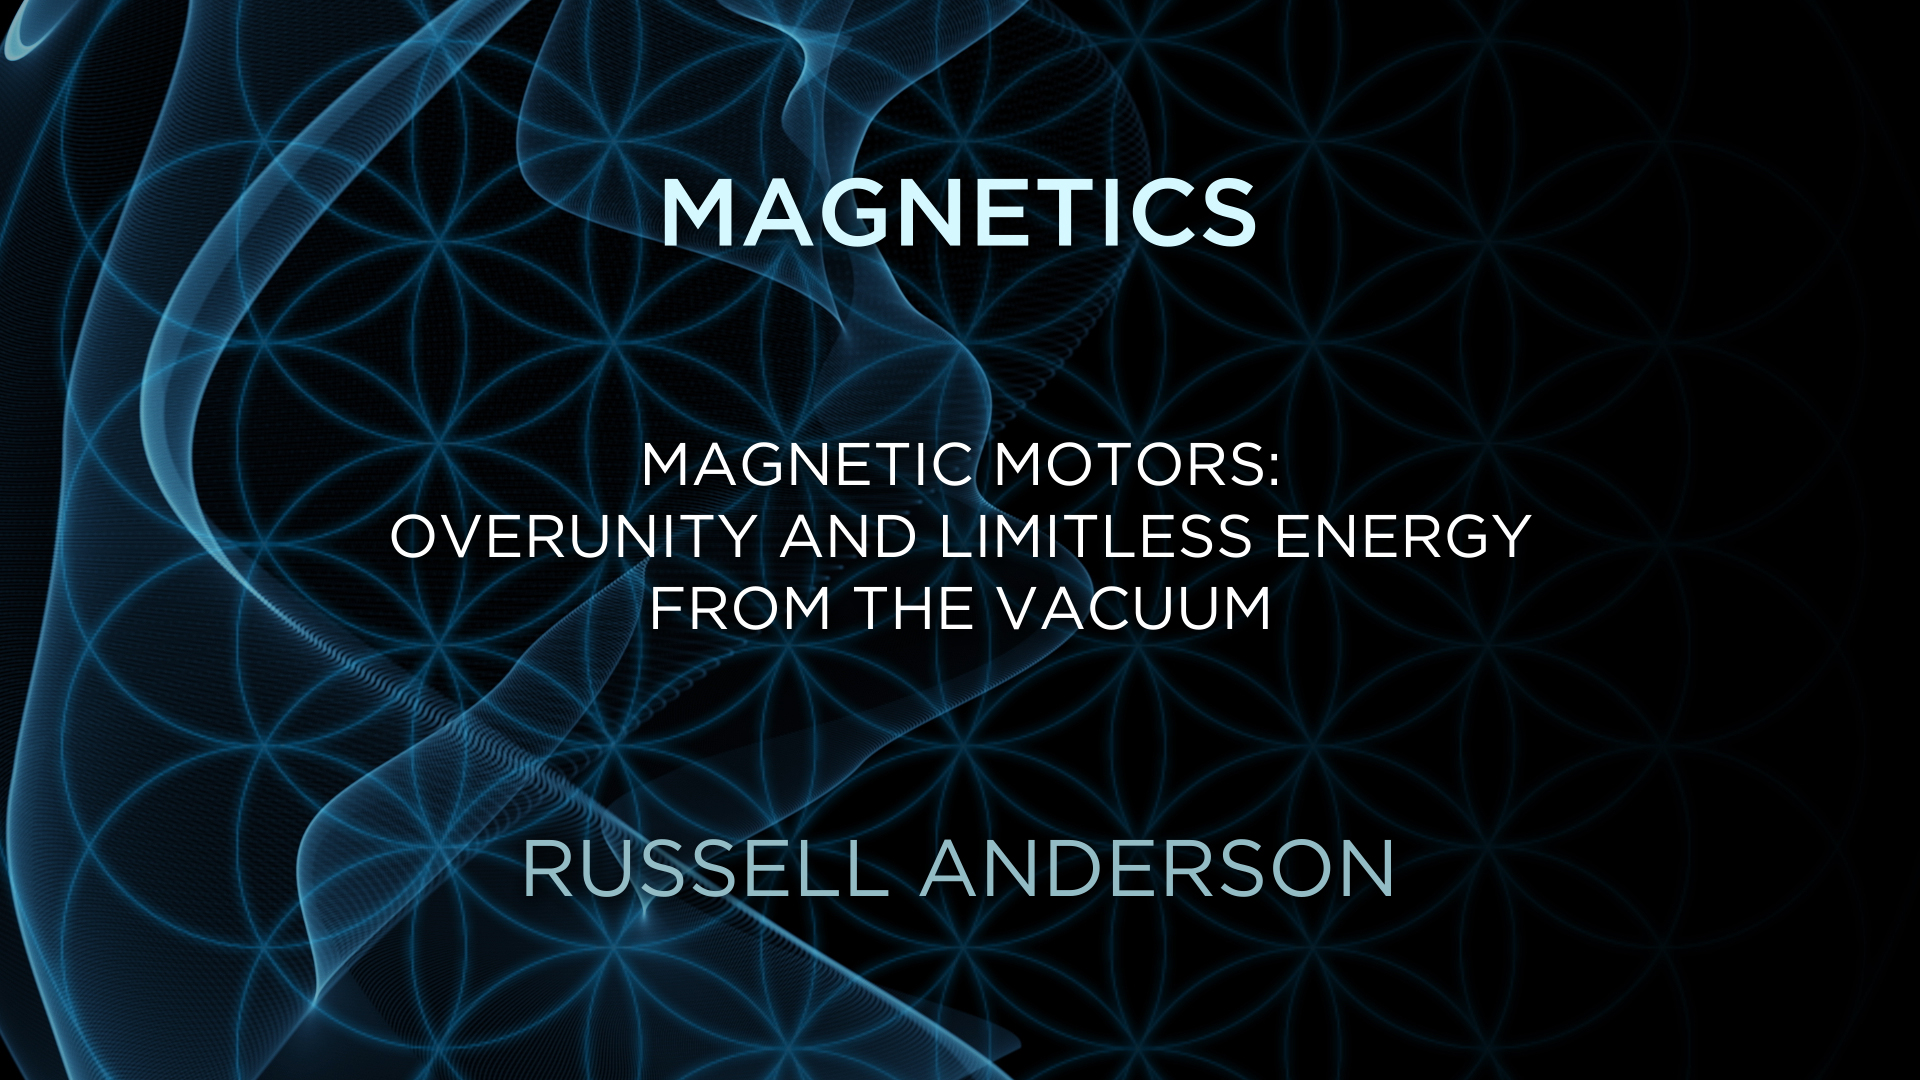 Russell Anderson – Magnetic Motors, Overunity and limitless Energy from the Vacuum